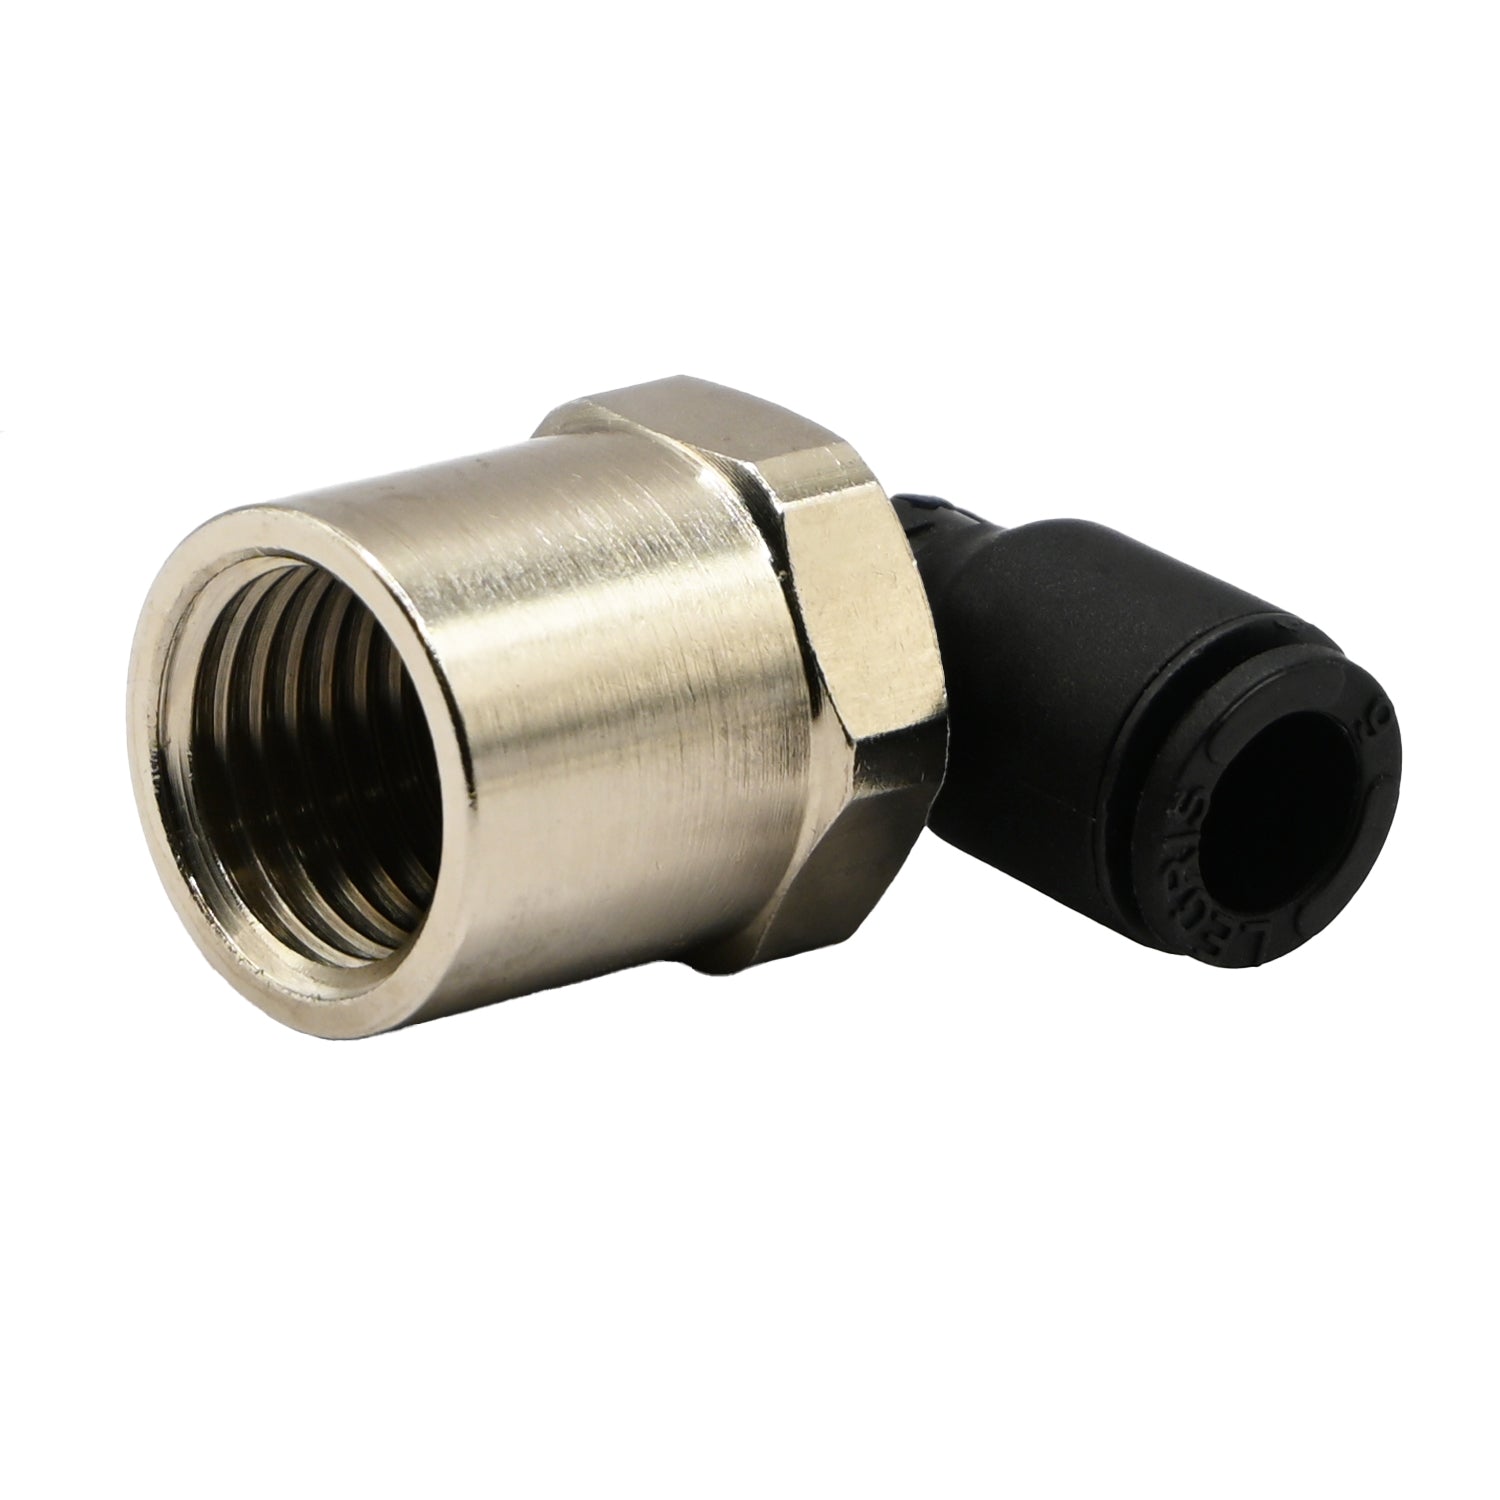 90 degree swivel elbow push to connect tube fitting with nickel plated threaded brass base and black plastic tube connector. Part shown on white background. 